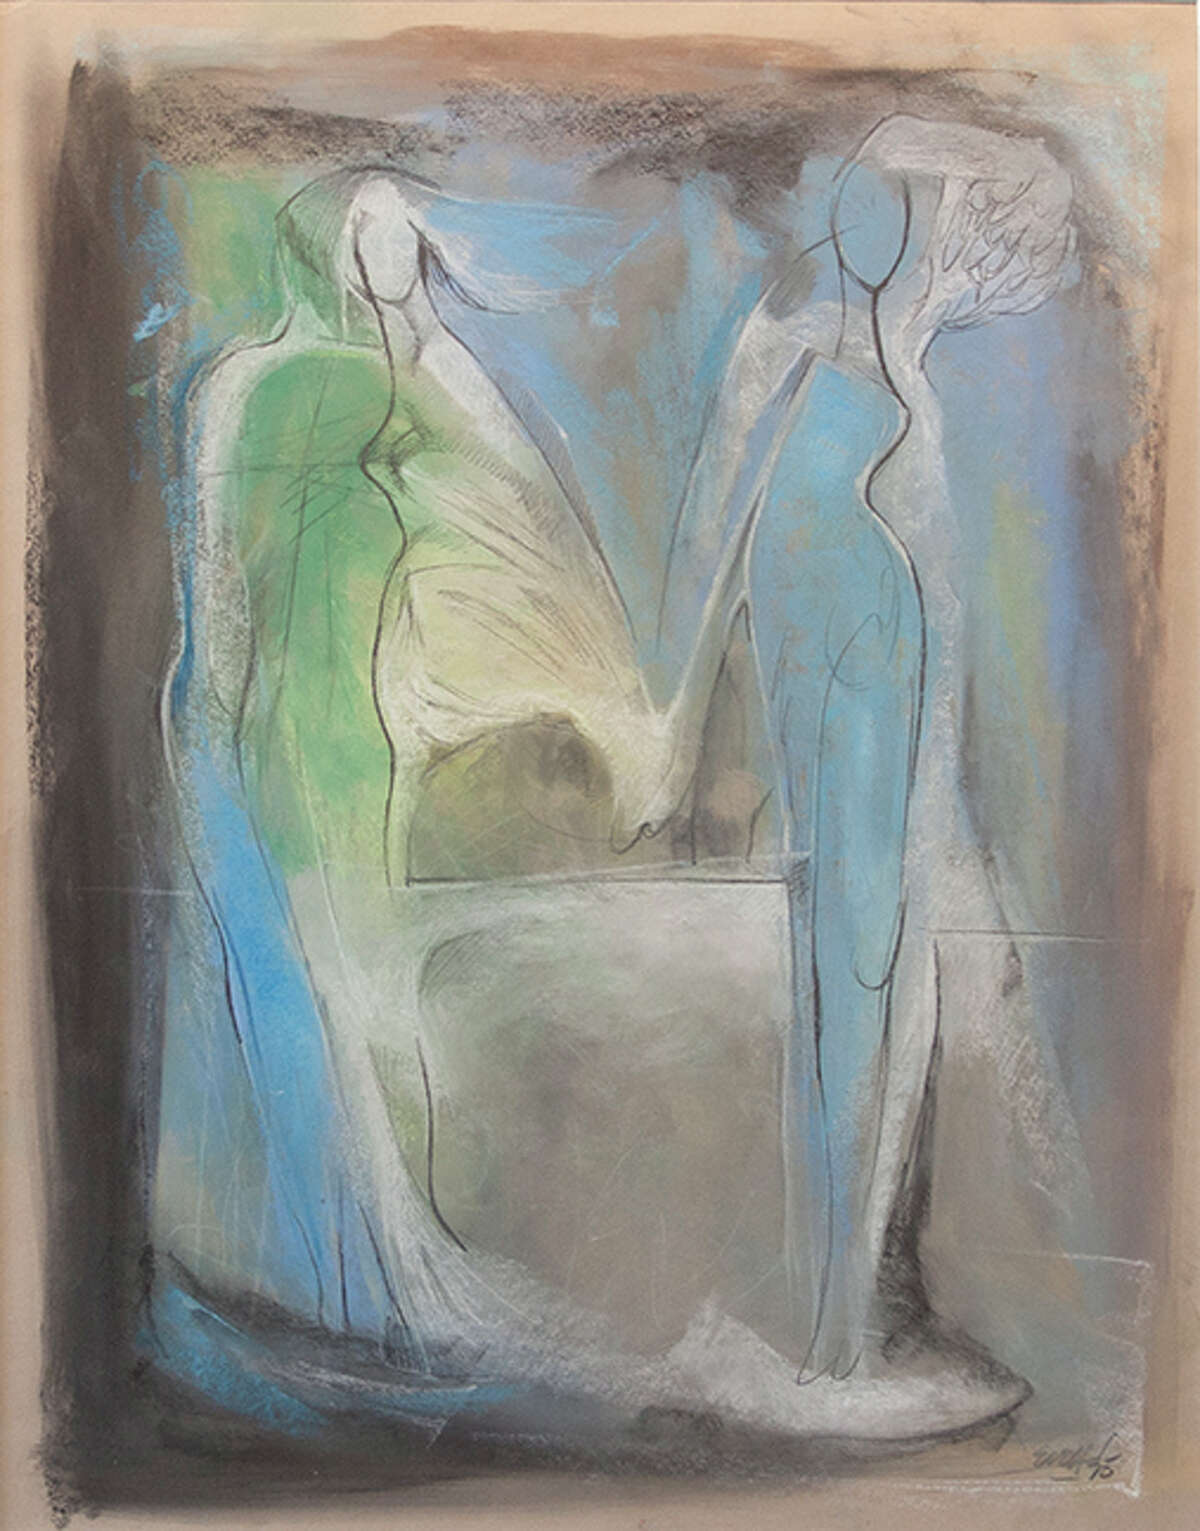 For Phil Evett, drawing is a form of entertainment and relaxation. This untitled pastel is from 1974.